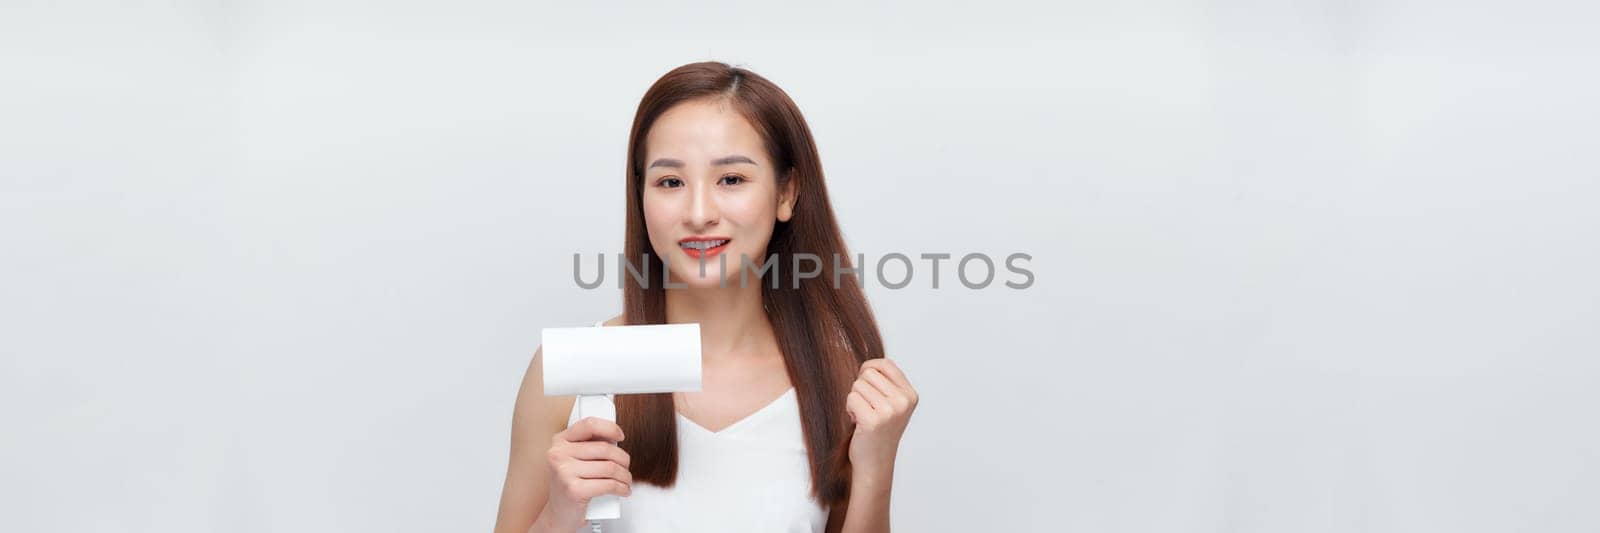 Crop attractive young female holding blow dryer on white banner background by makidotvn